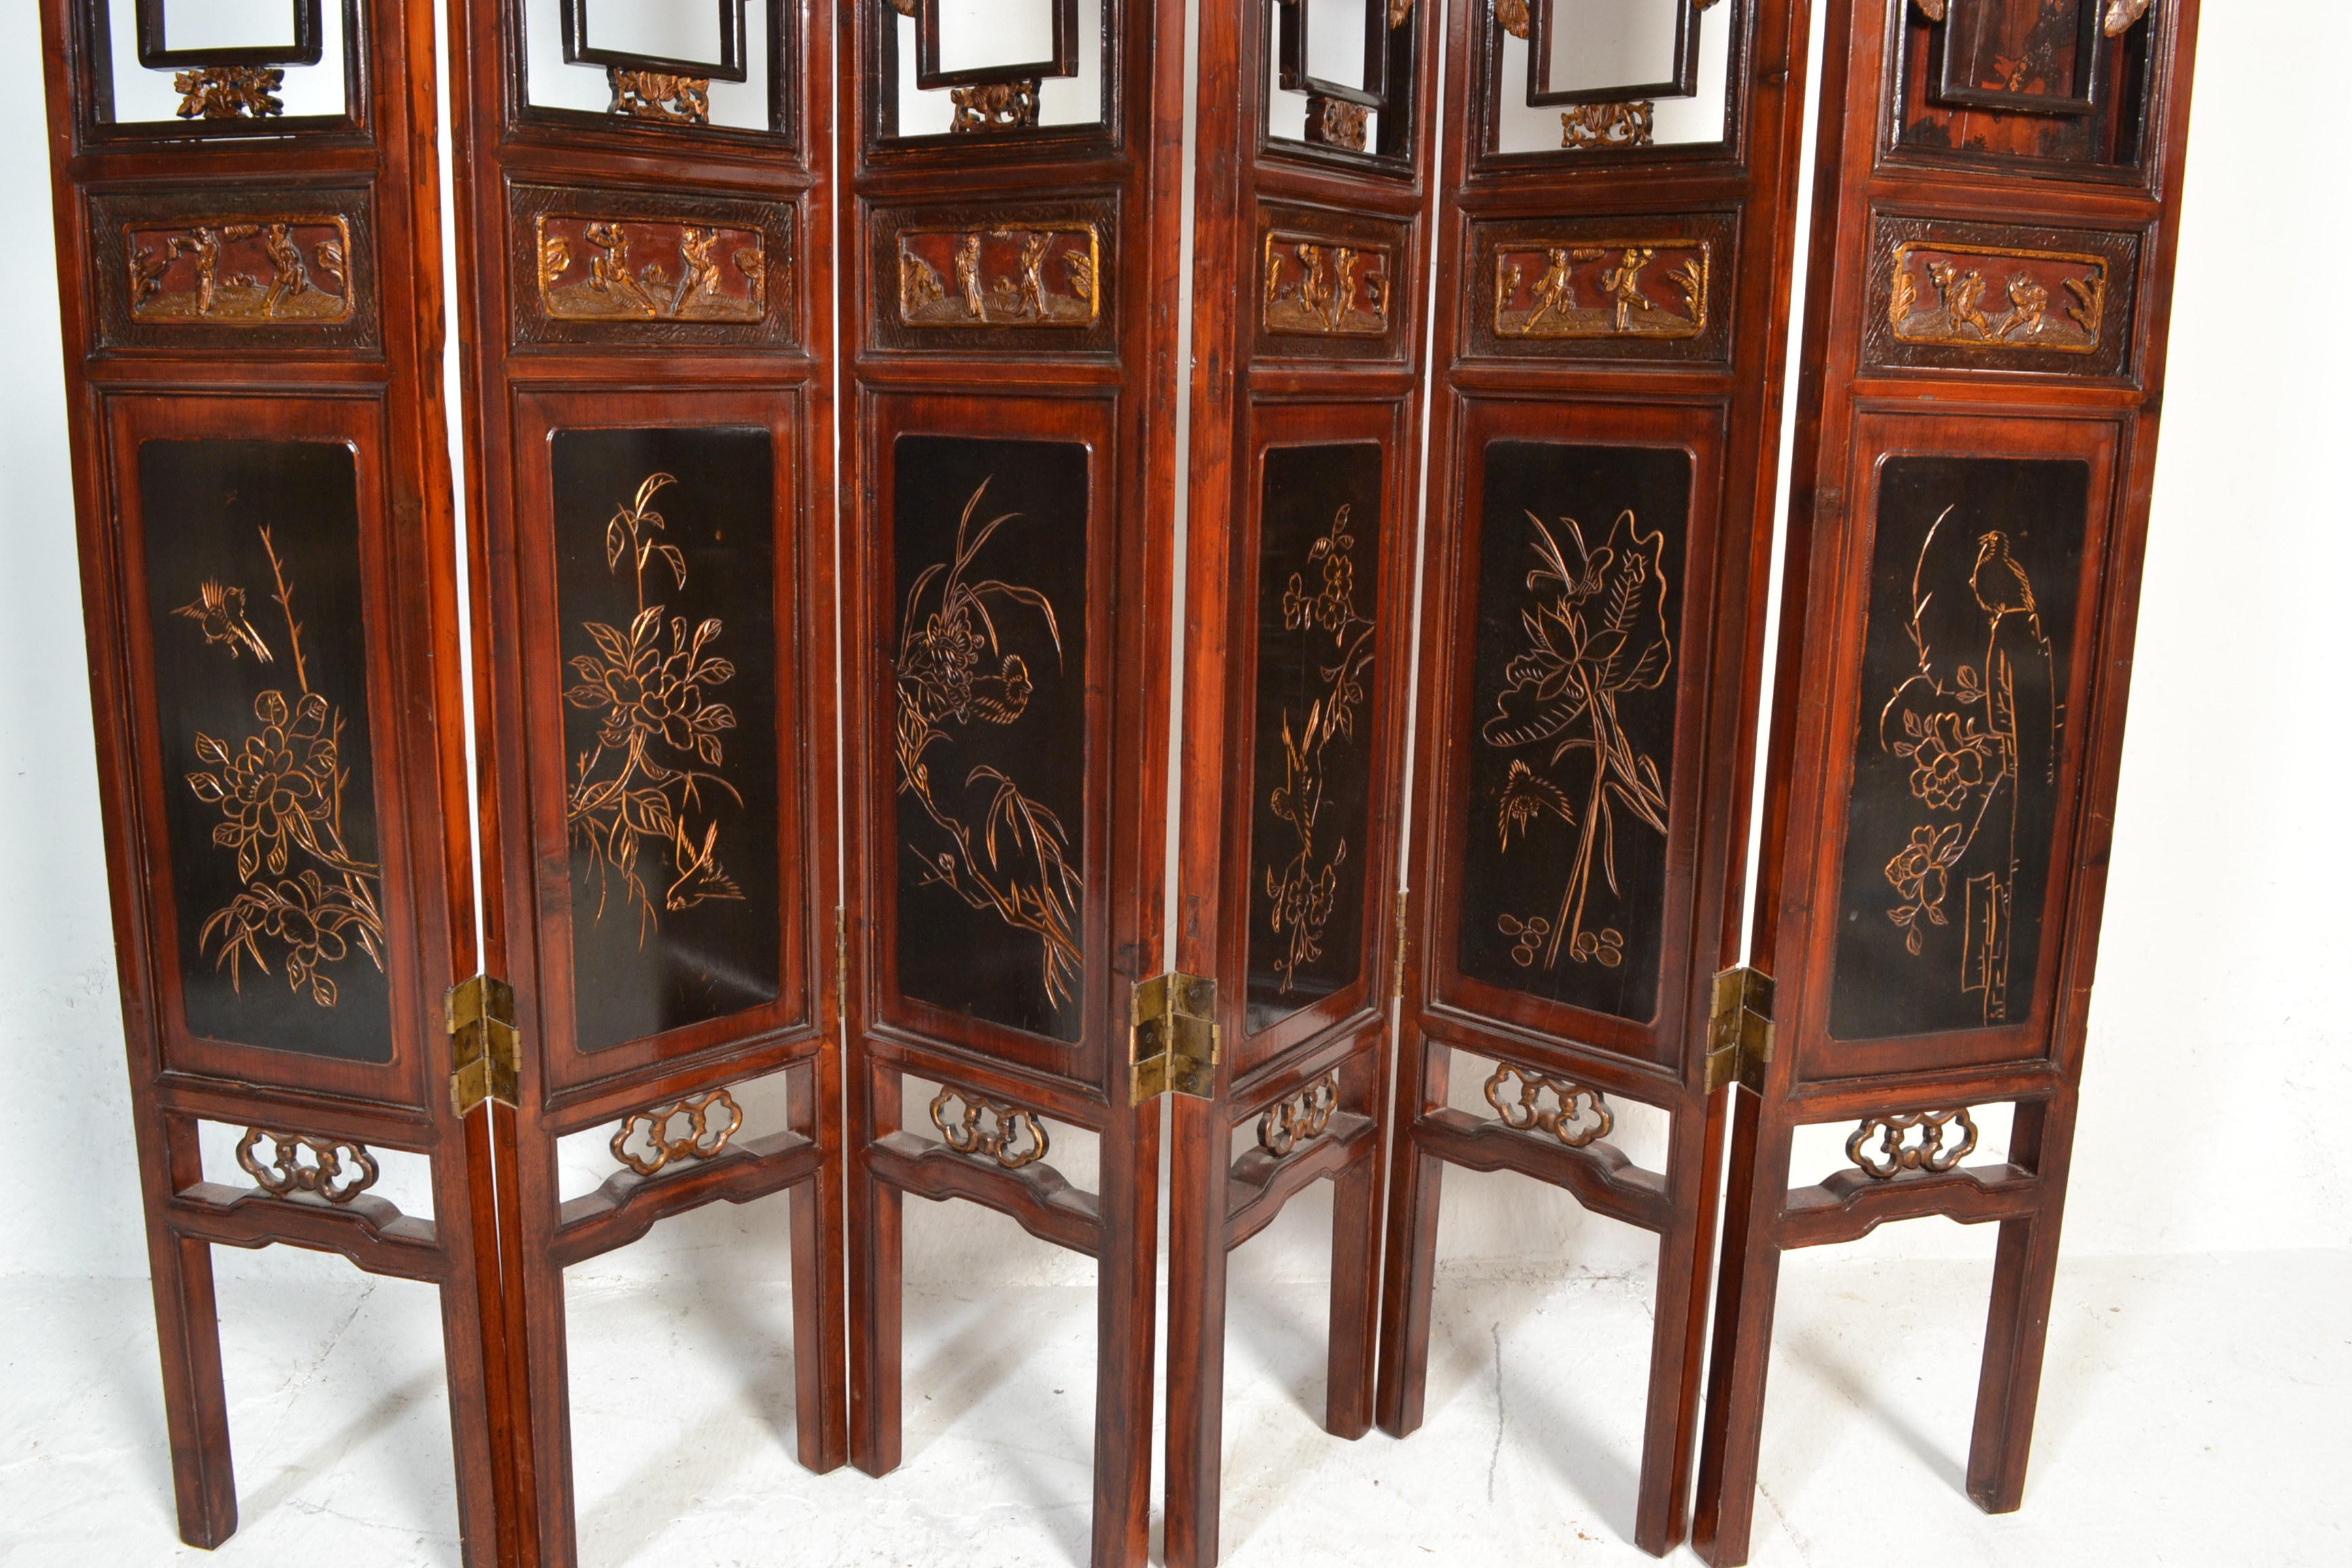 A large 20th Century six fold Chinese lacquered pine screen having scroll fret work panel atop - Image 3 of 4